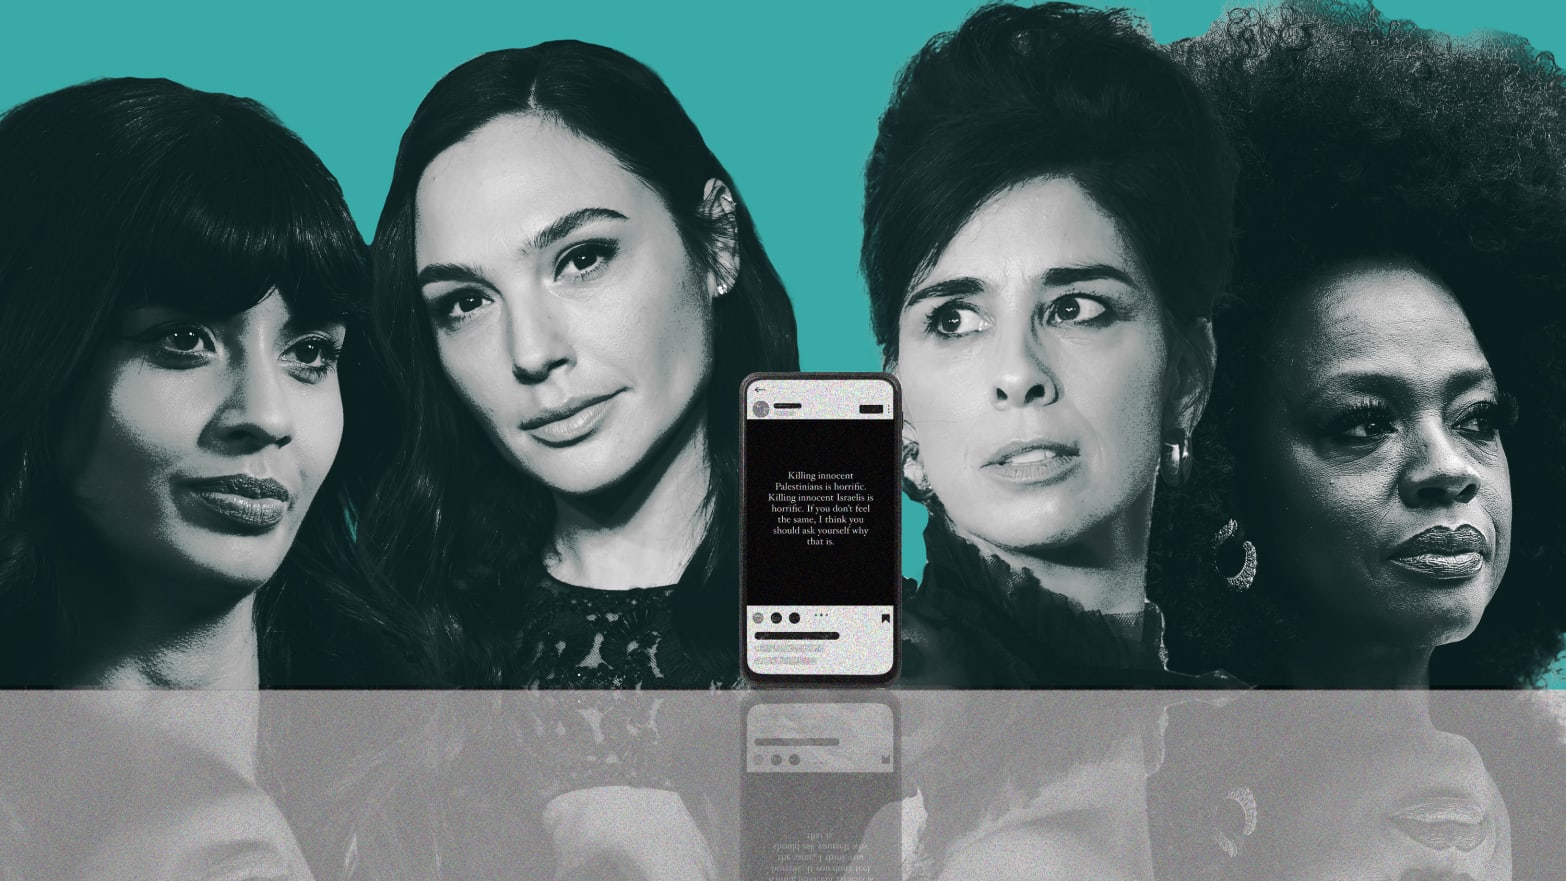 A photo illustration showing Viola Davis, Sarah Silvermann, Jameela Jamil and Gal Gadot surrounding an iphone that has a trending social media post about Palestine and Israel.